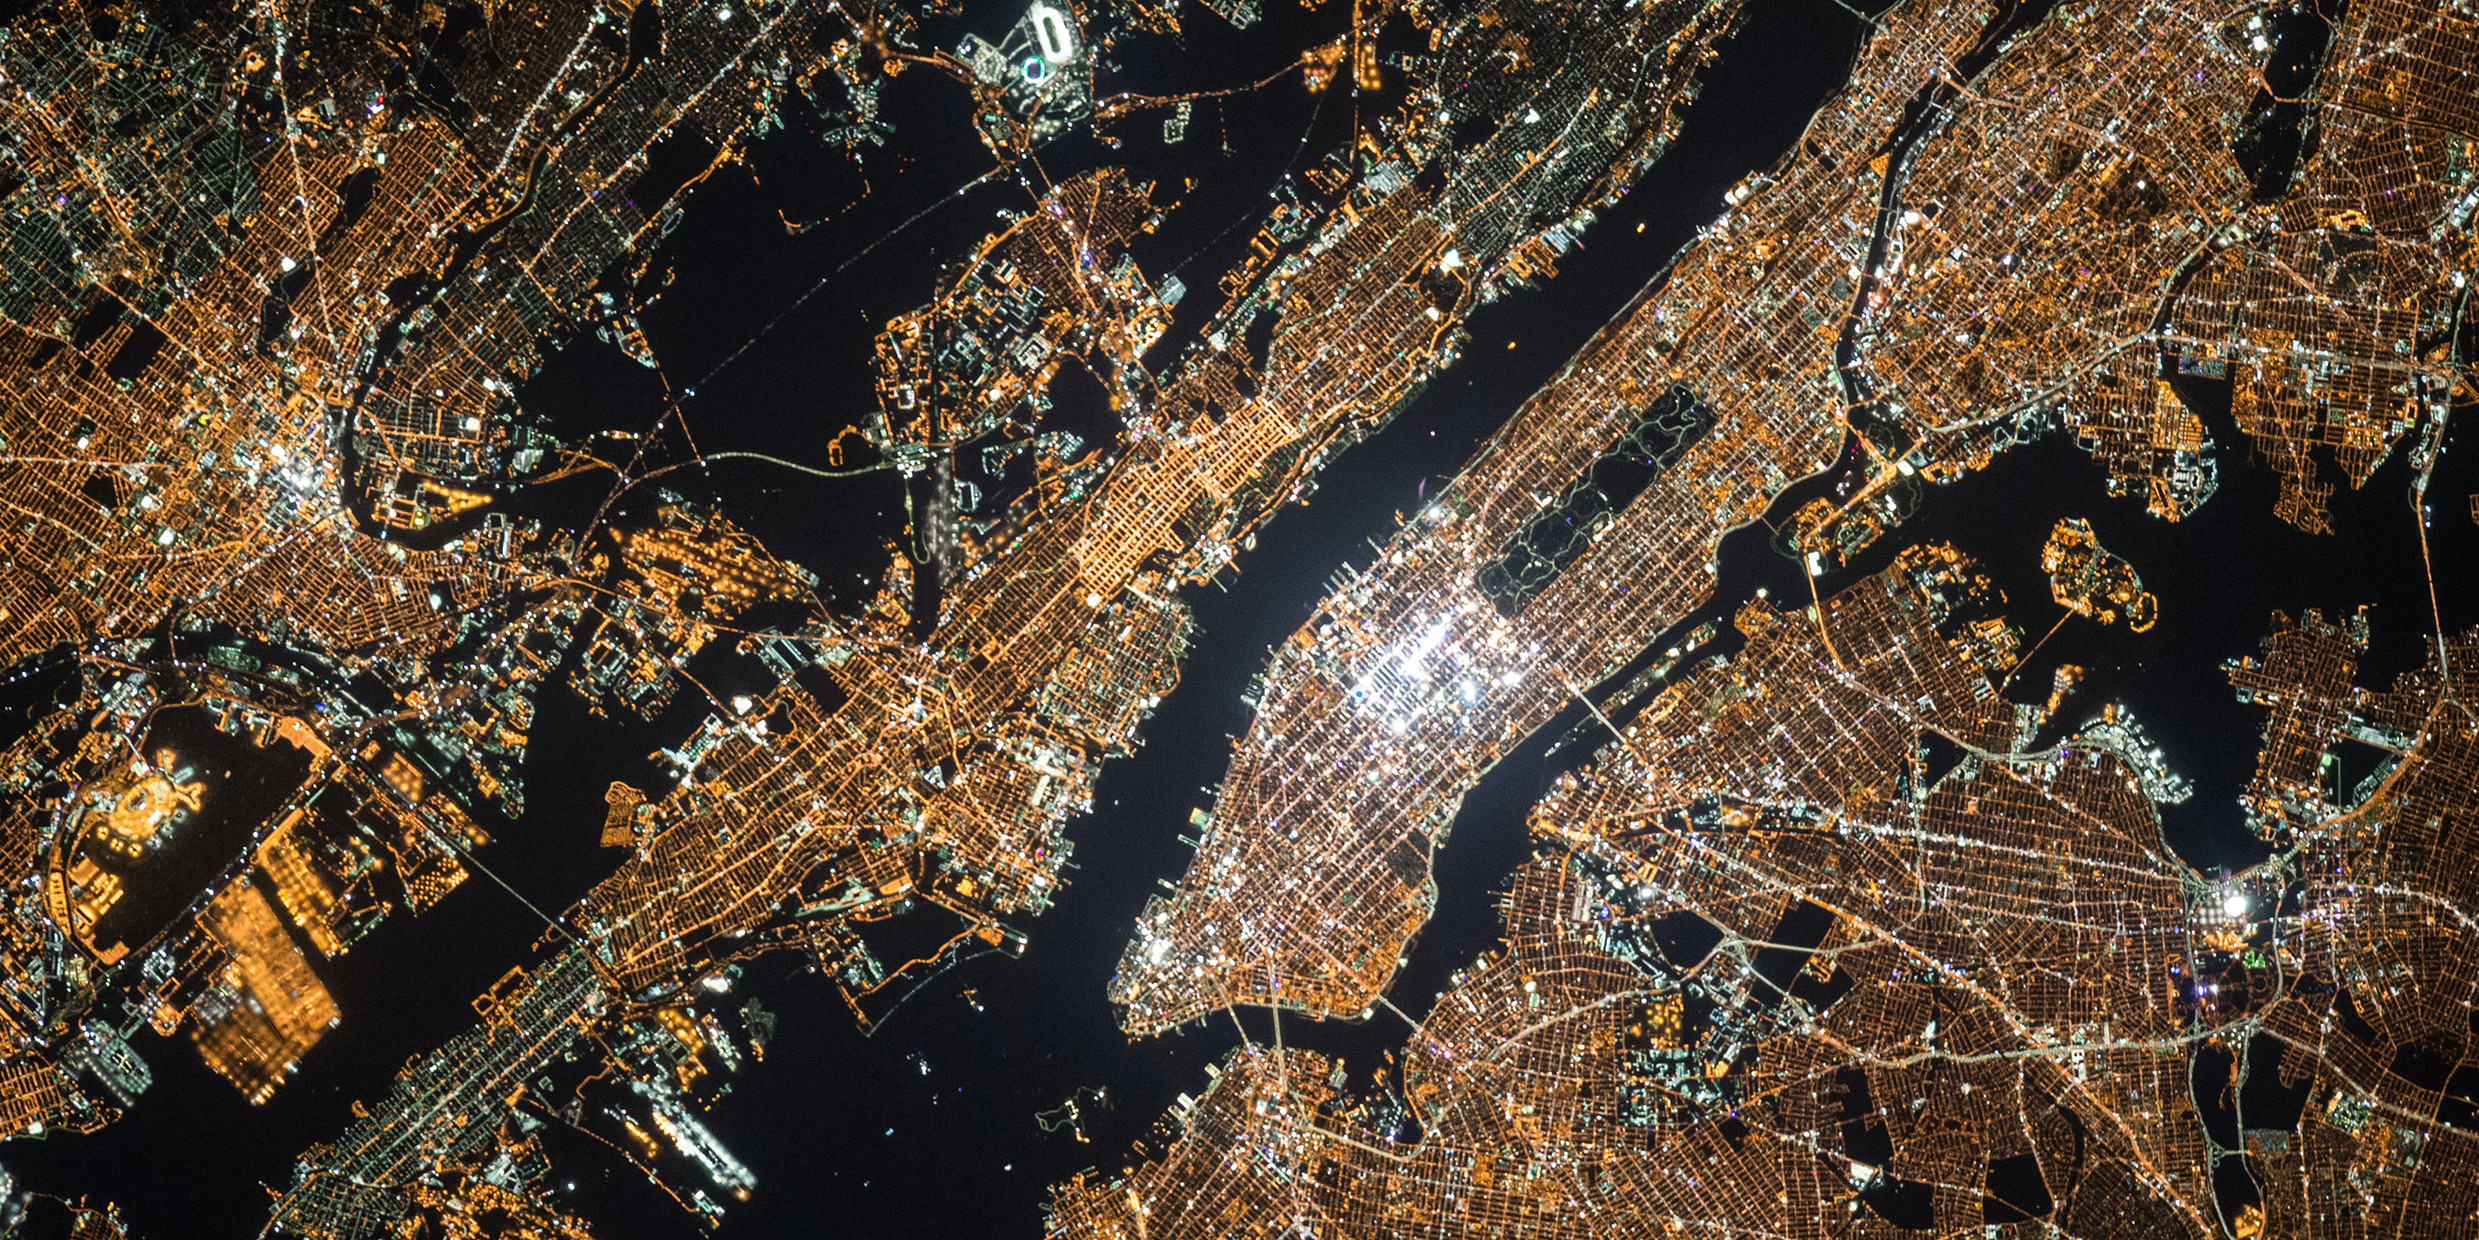 Aerial image of the glowing lights of New York City at night